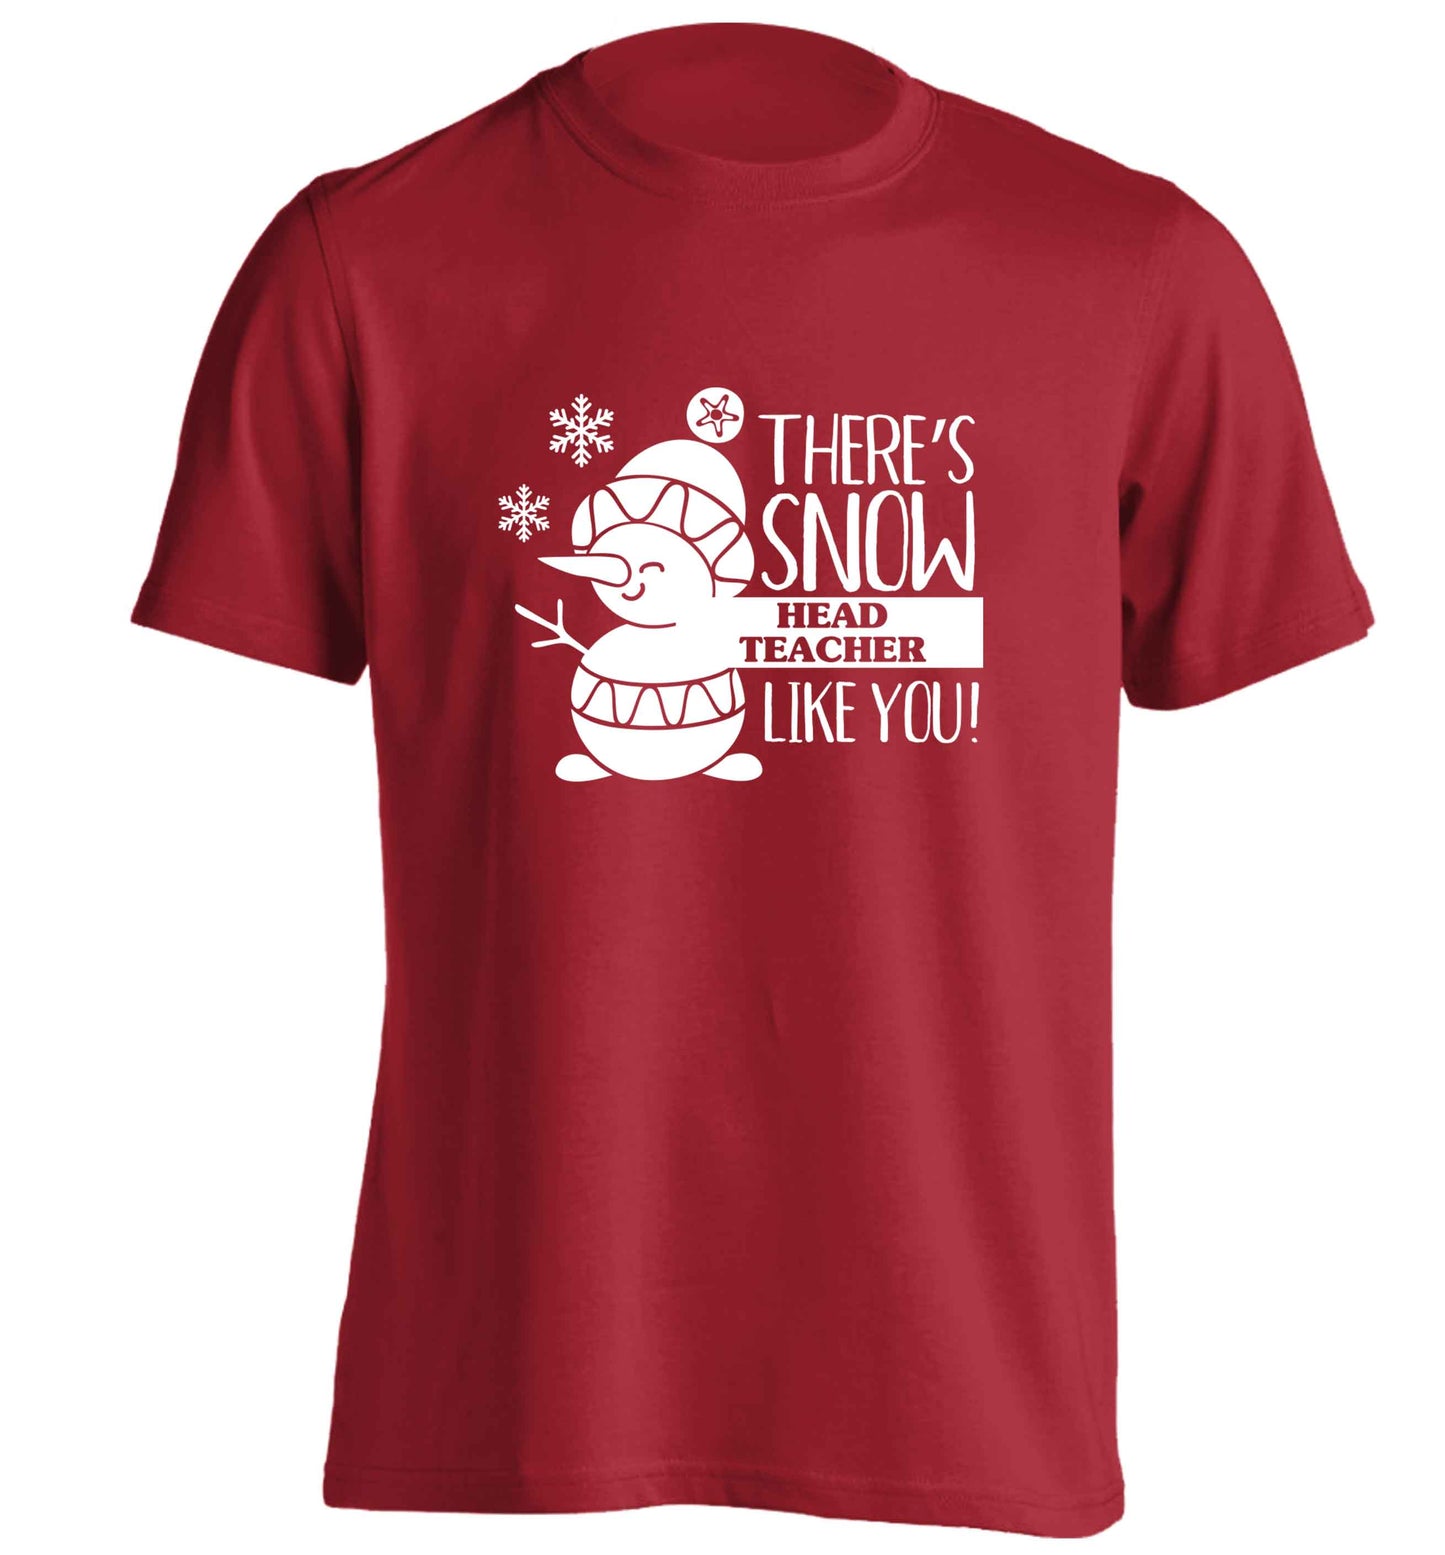 There's snow head teacher like you adults unisex red Tshirt 2XL